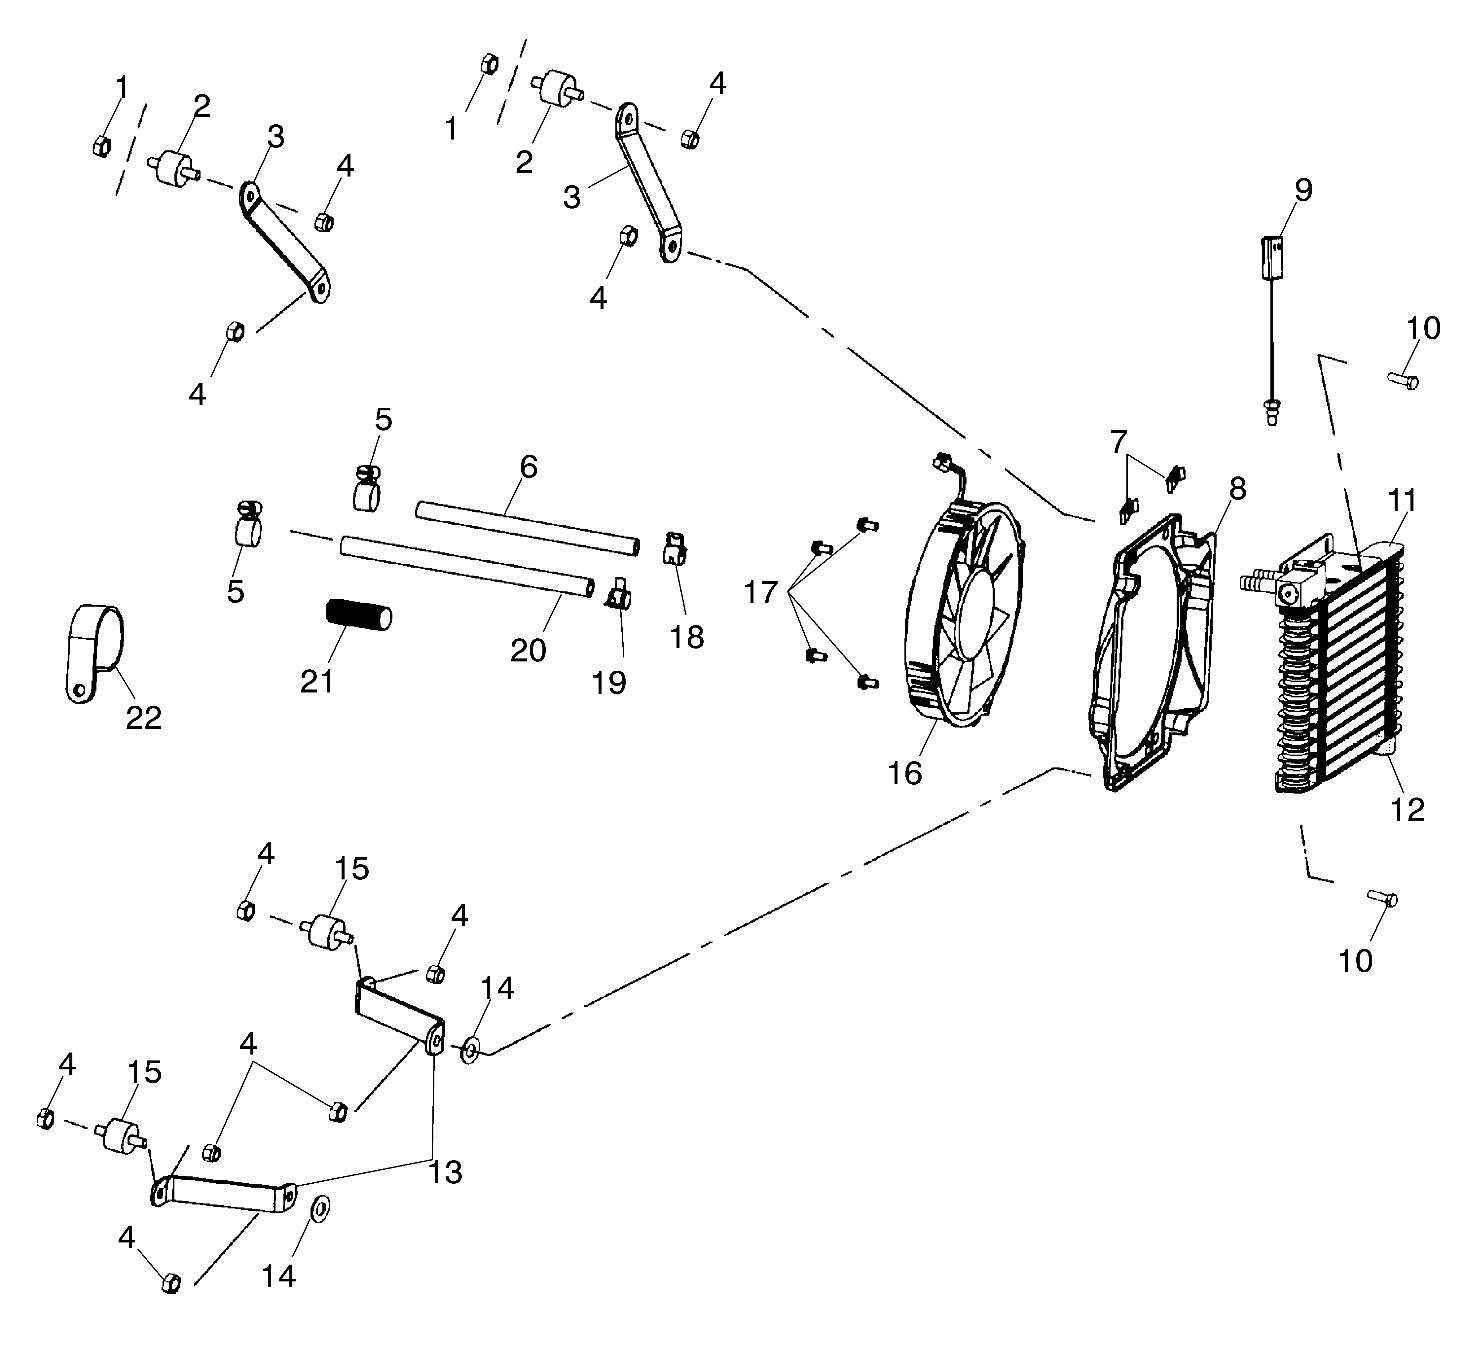 OIL COOLING (If built before 1/01/00) - A00CB32AA (4949354935A011)